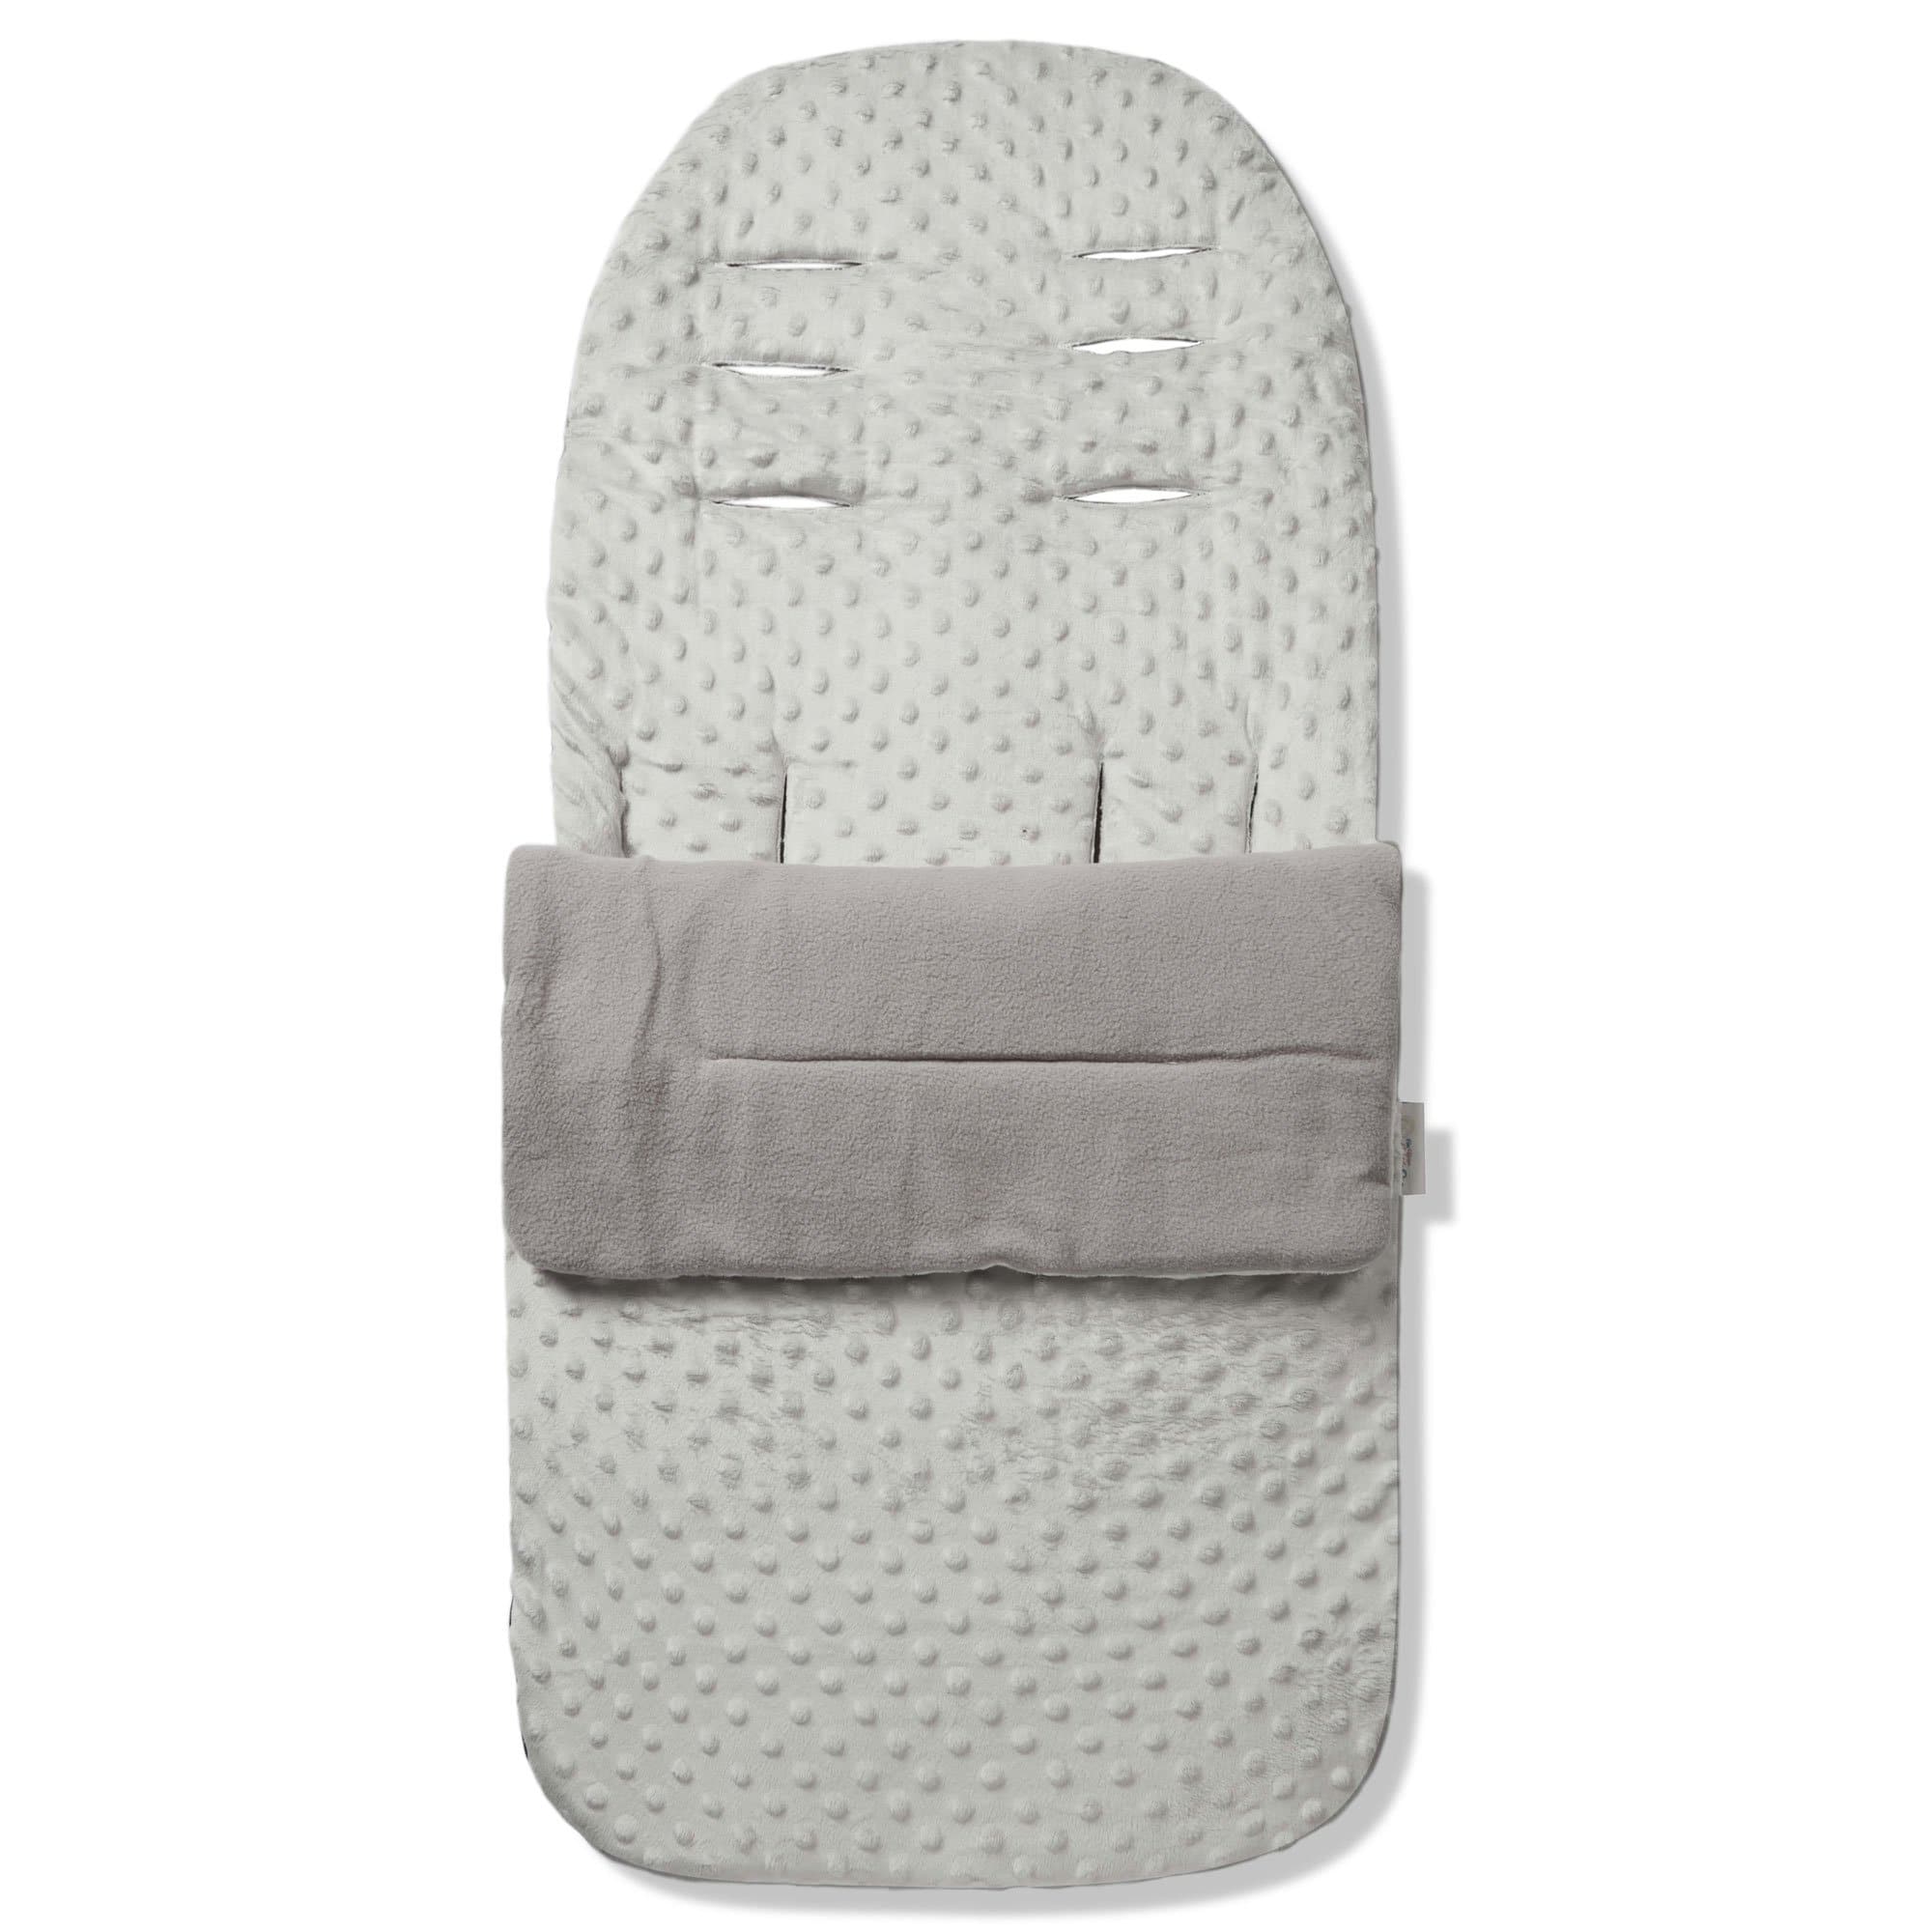 Dimple Footmuff / Cosy Toes Compatible with Gesslein - For Your Little One